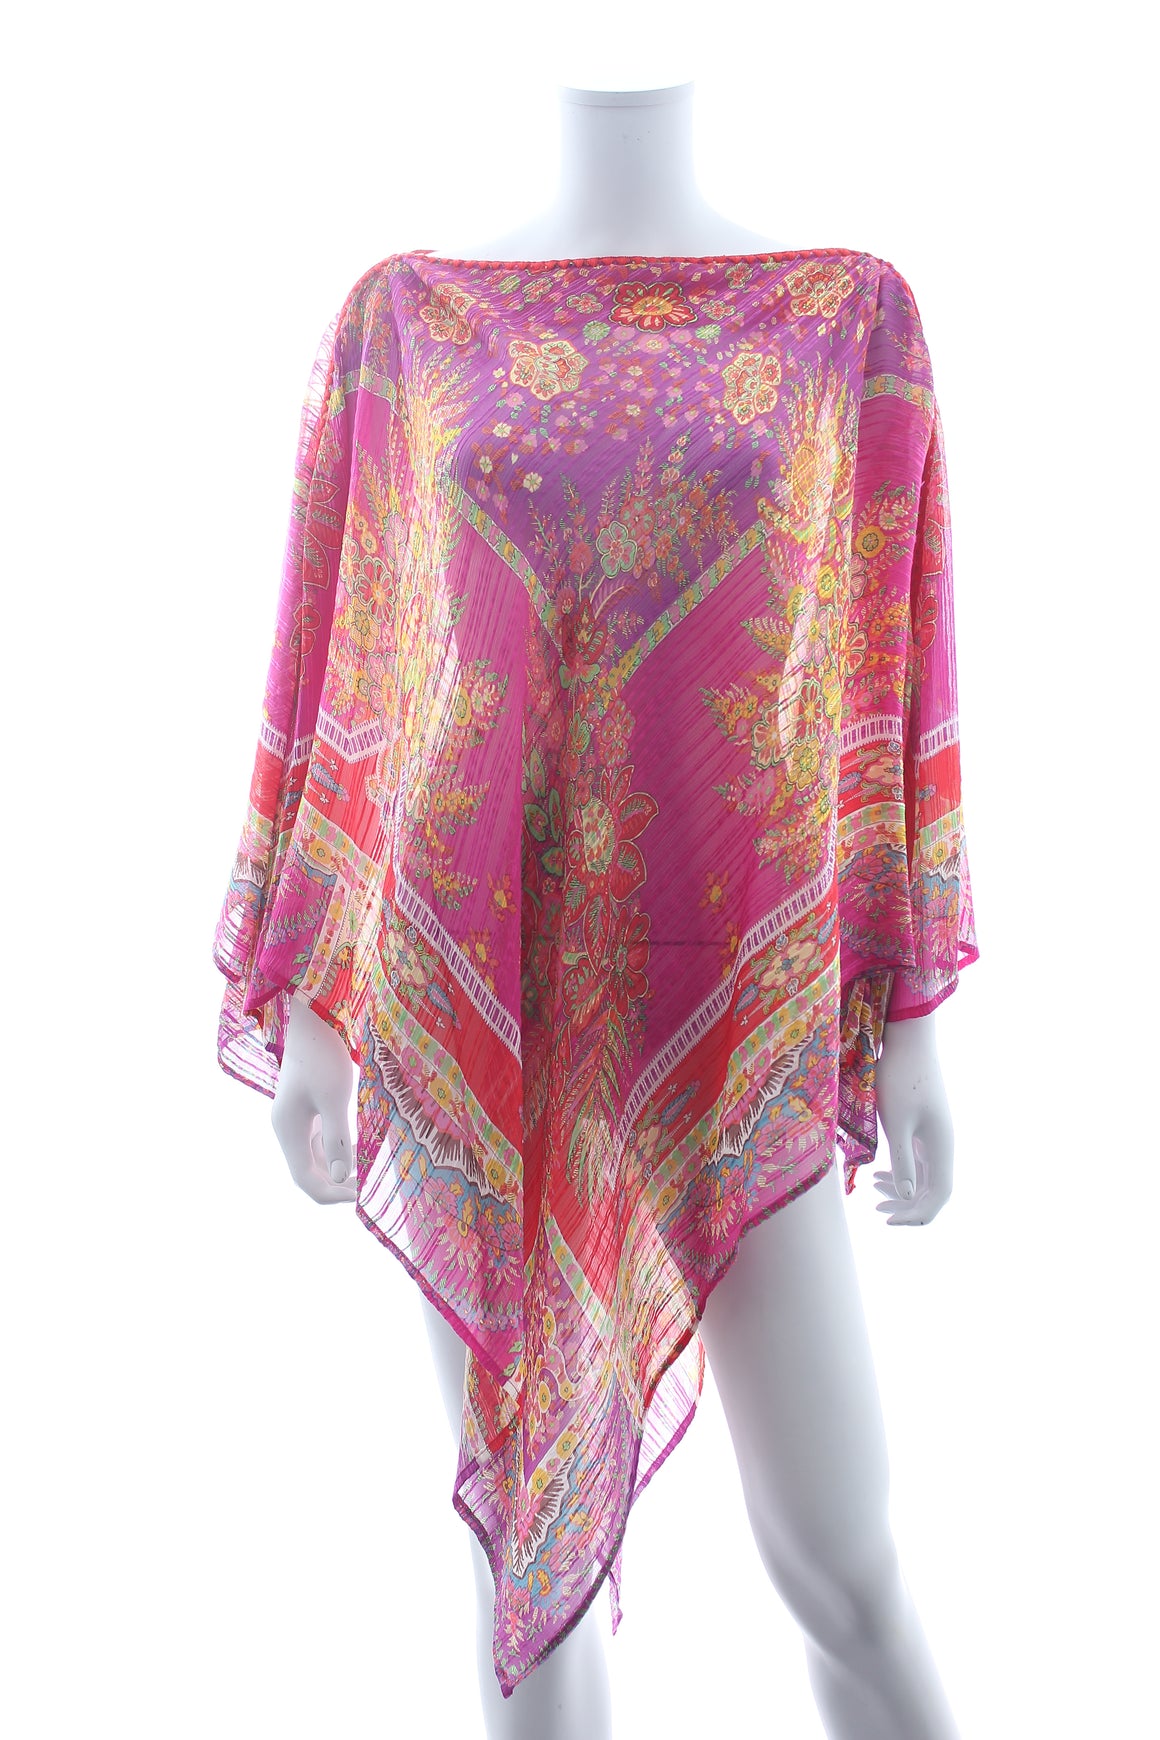 Etro Embroidered Silk Triangle Floral Printed Poncho